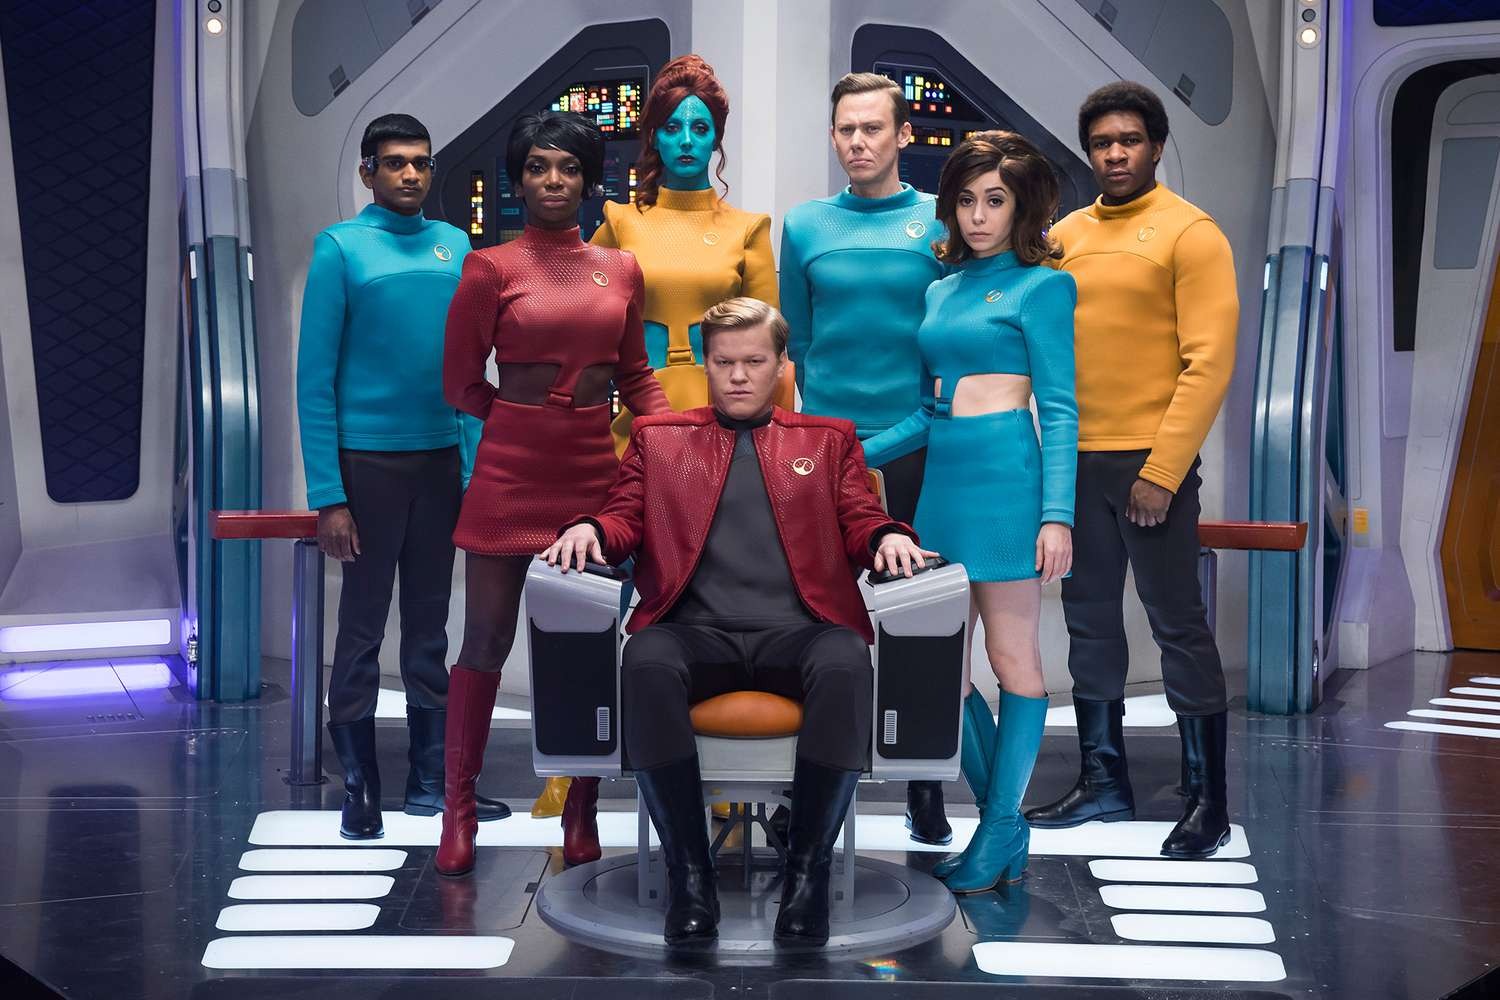 Black Mirror Returns For Season 7 In 2025 With 'Uss Callister' Sequel